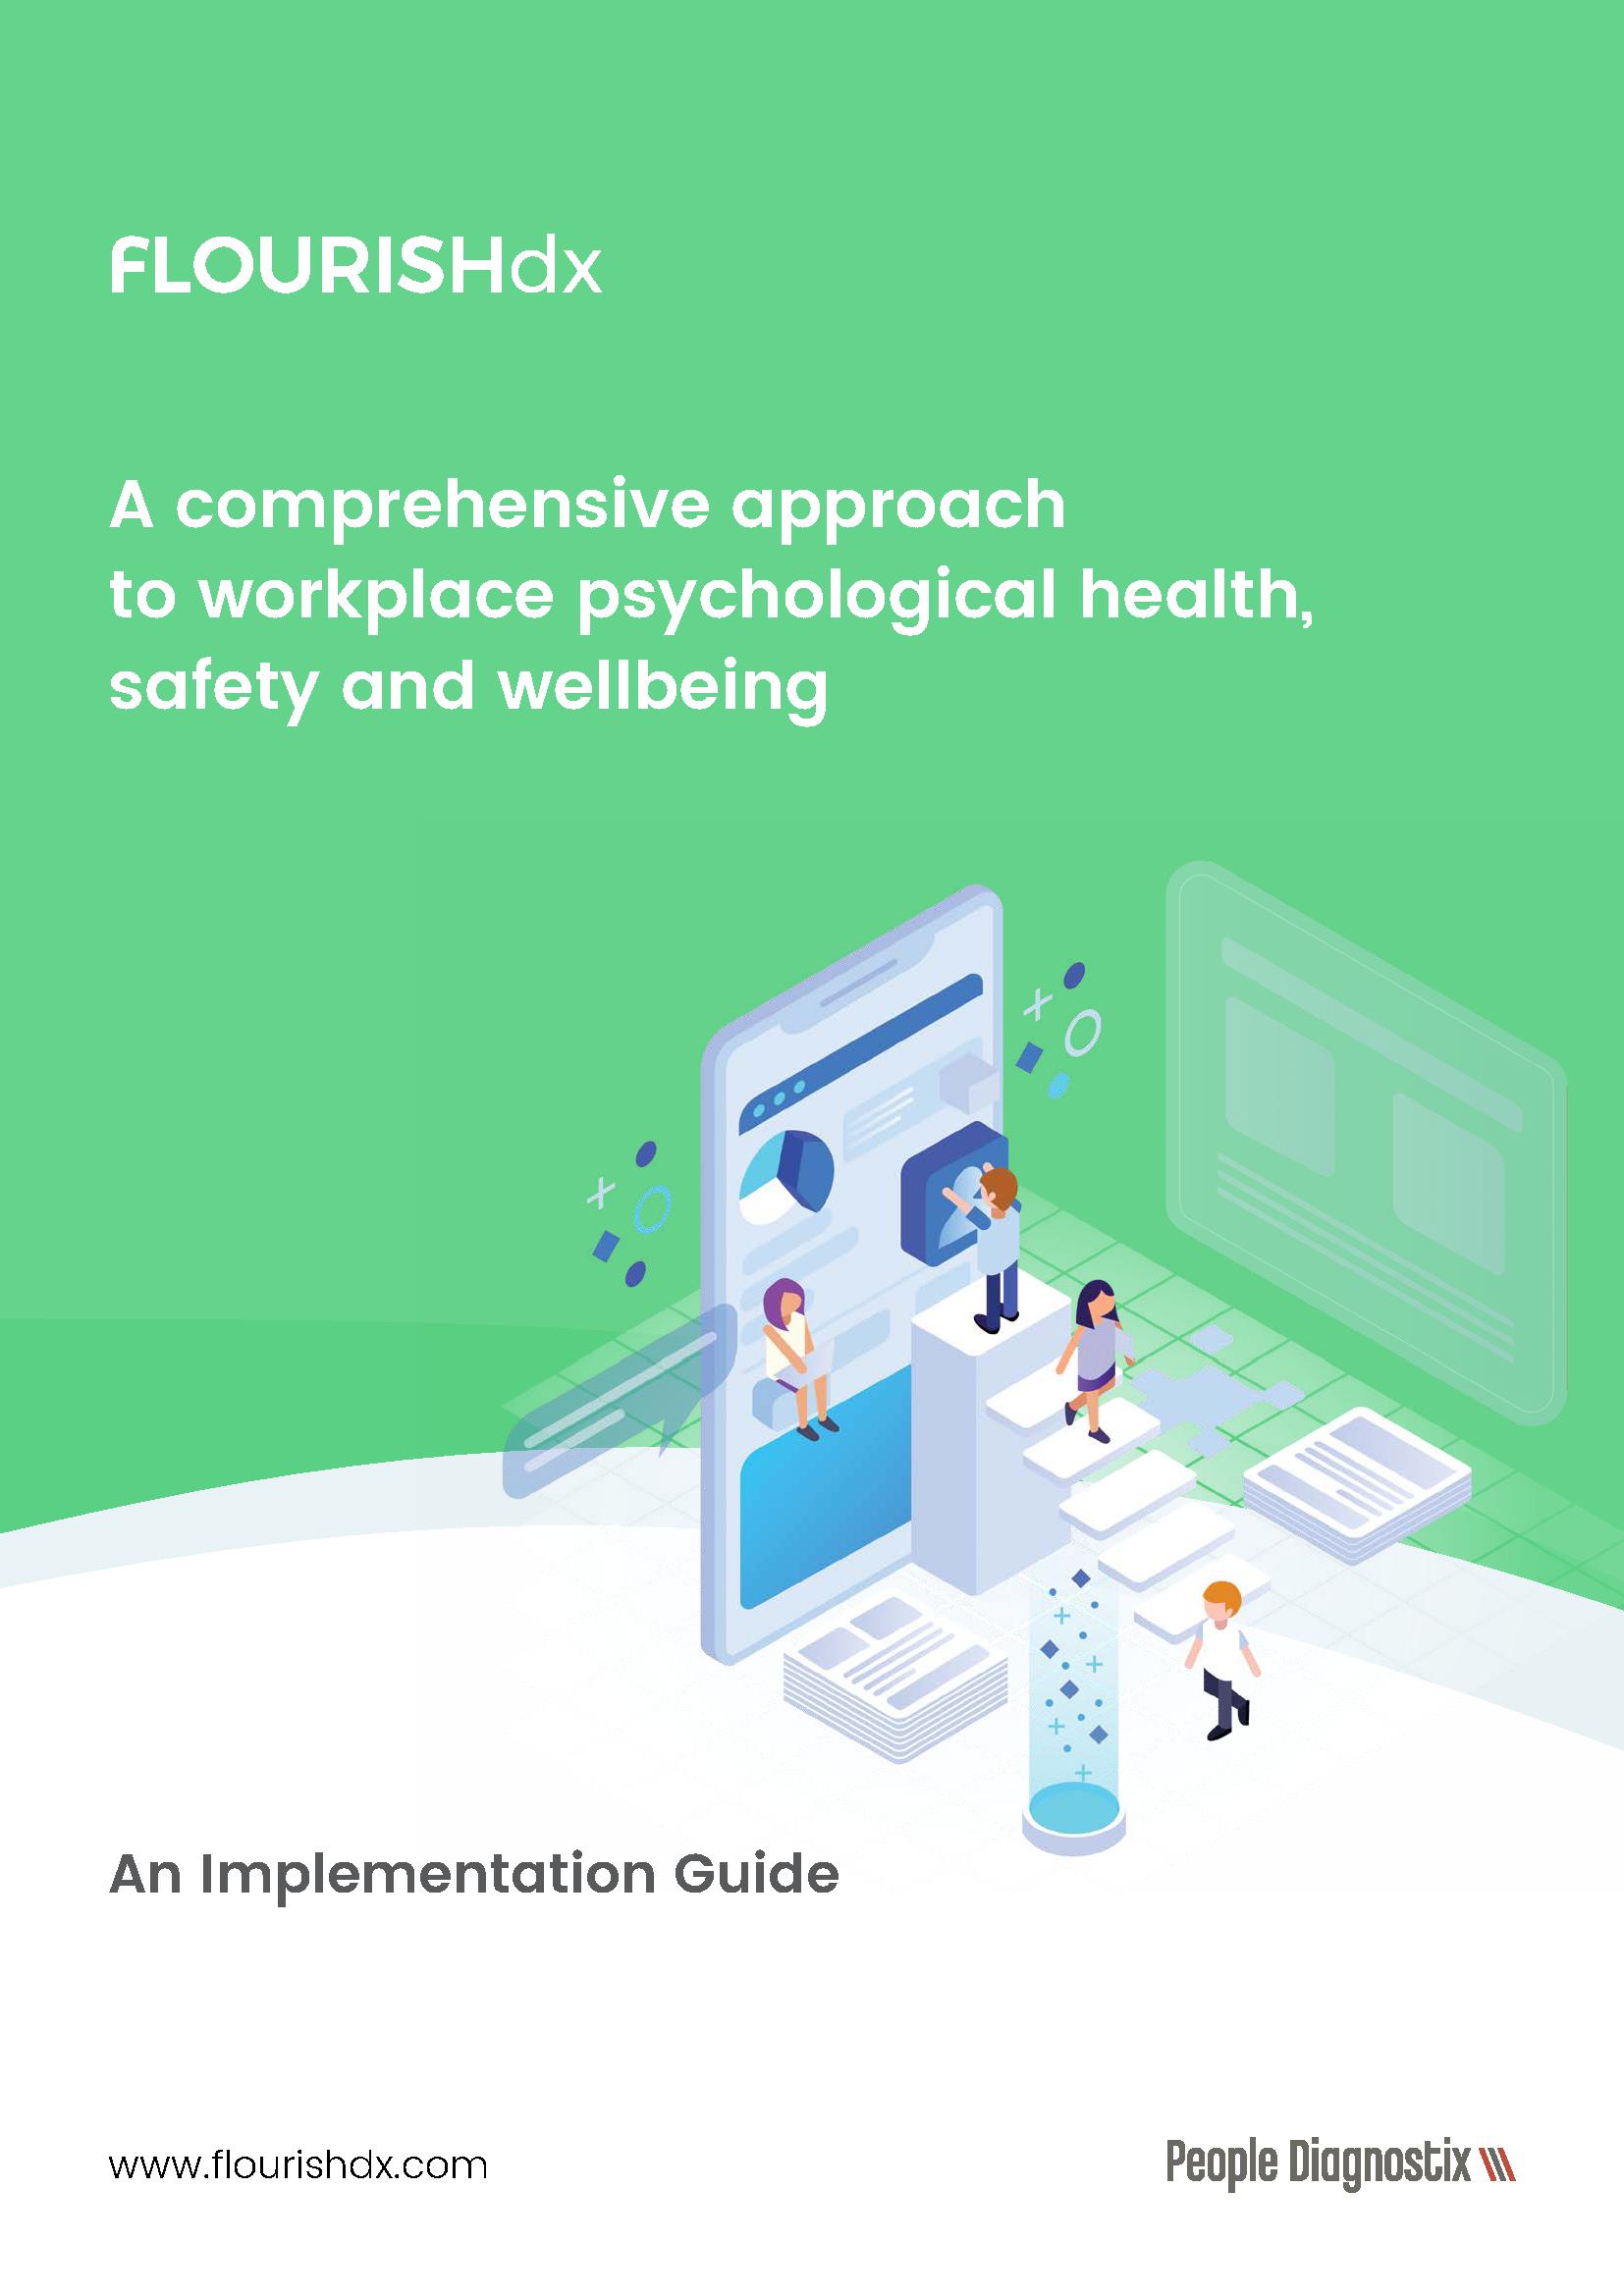 A comprehensive approach to workplace psychological health, safety and wellbeing